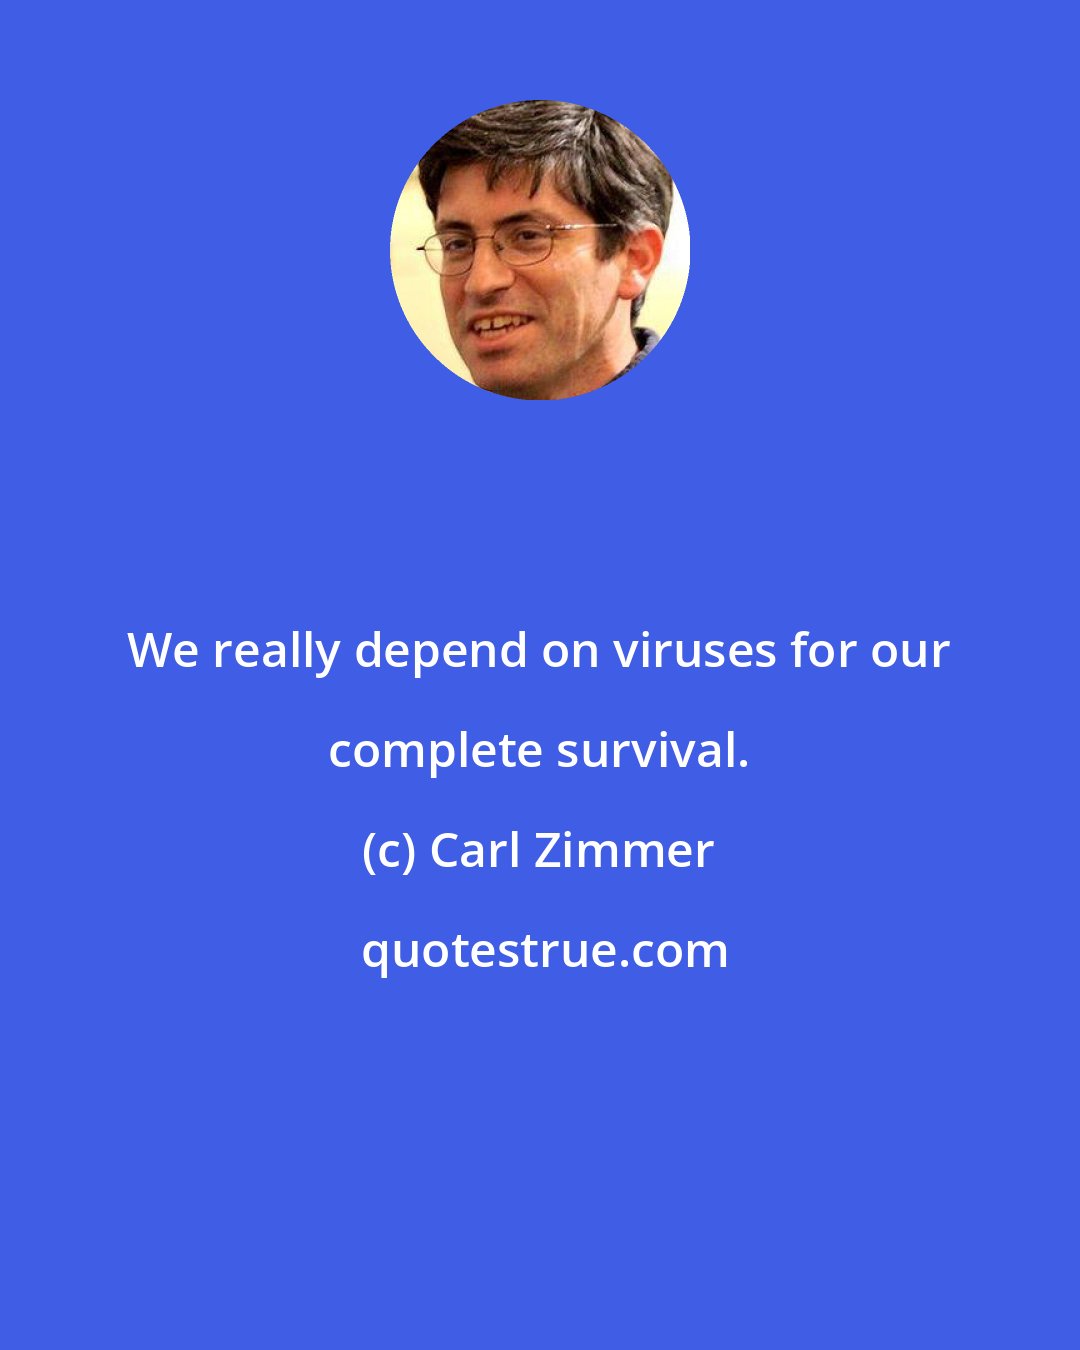 Carl Zimmer: We really depend on viruses for our complete survival.